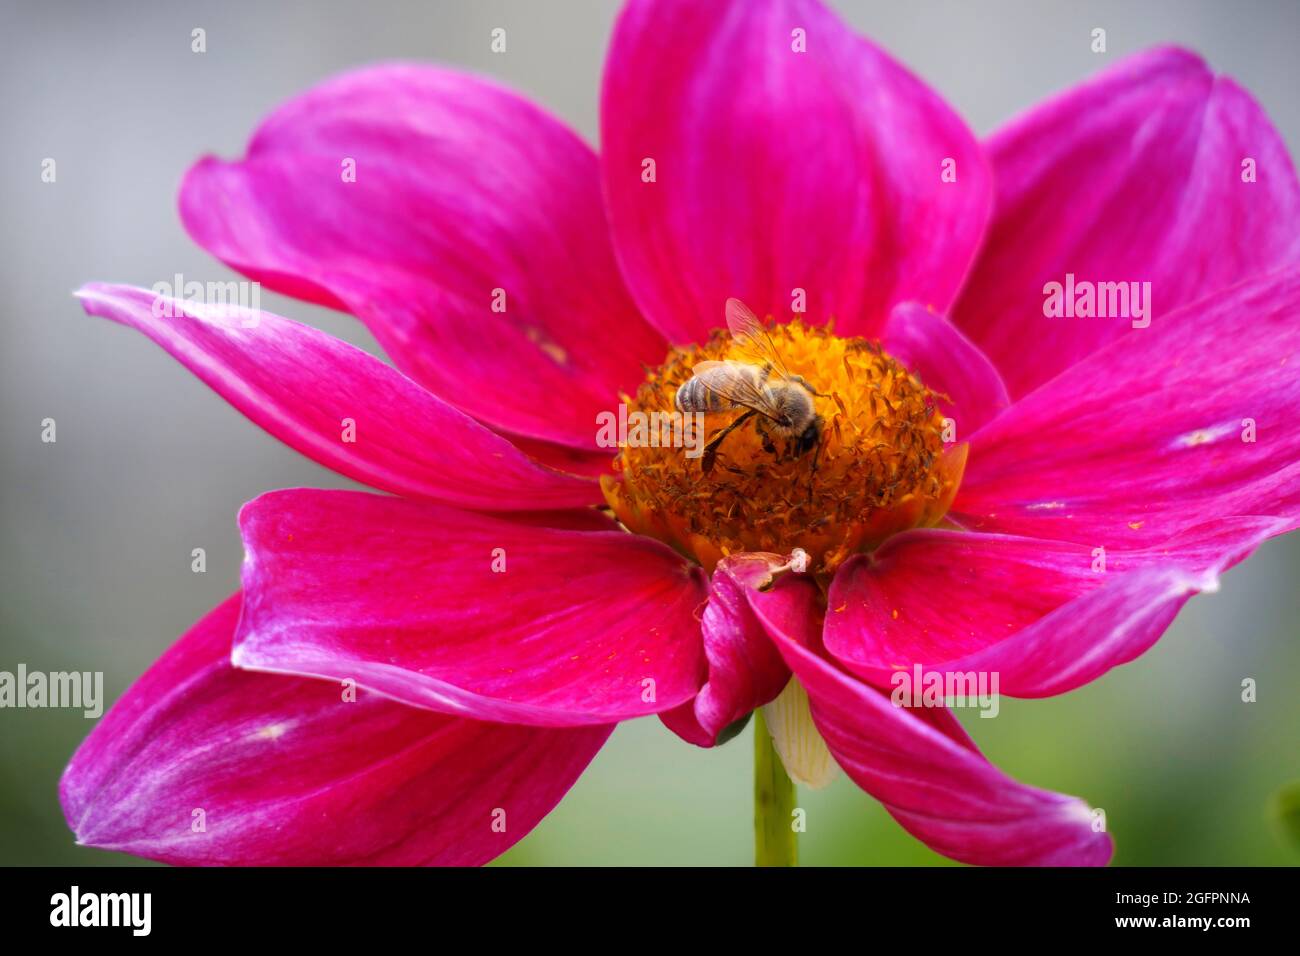 Rose Mignon Shades Single Dahlia Flower with its Bright Pink Fuchsia Petals Attracts a Honey Bee that has Landed on the Yellow Center to Pollinate Stock Photo